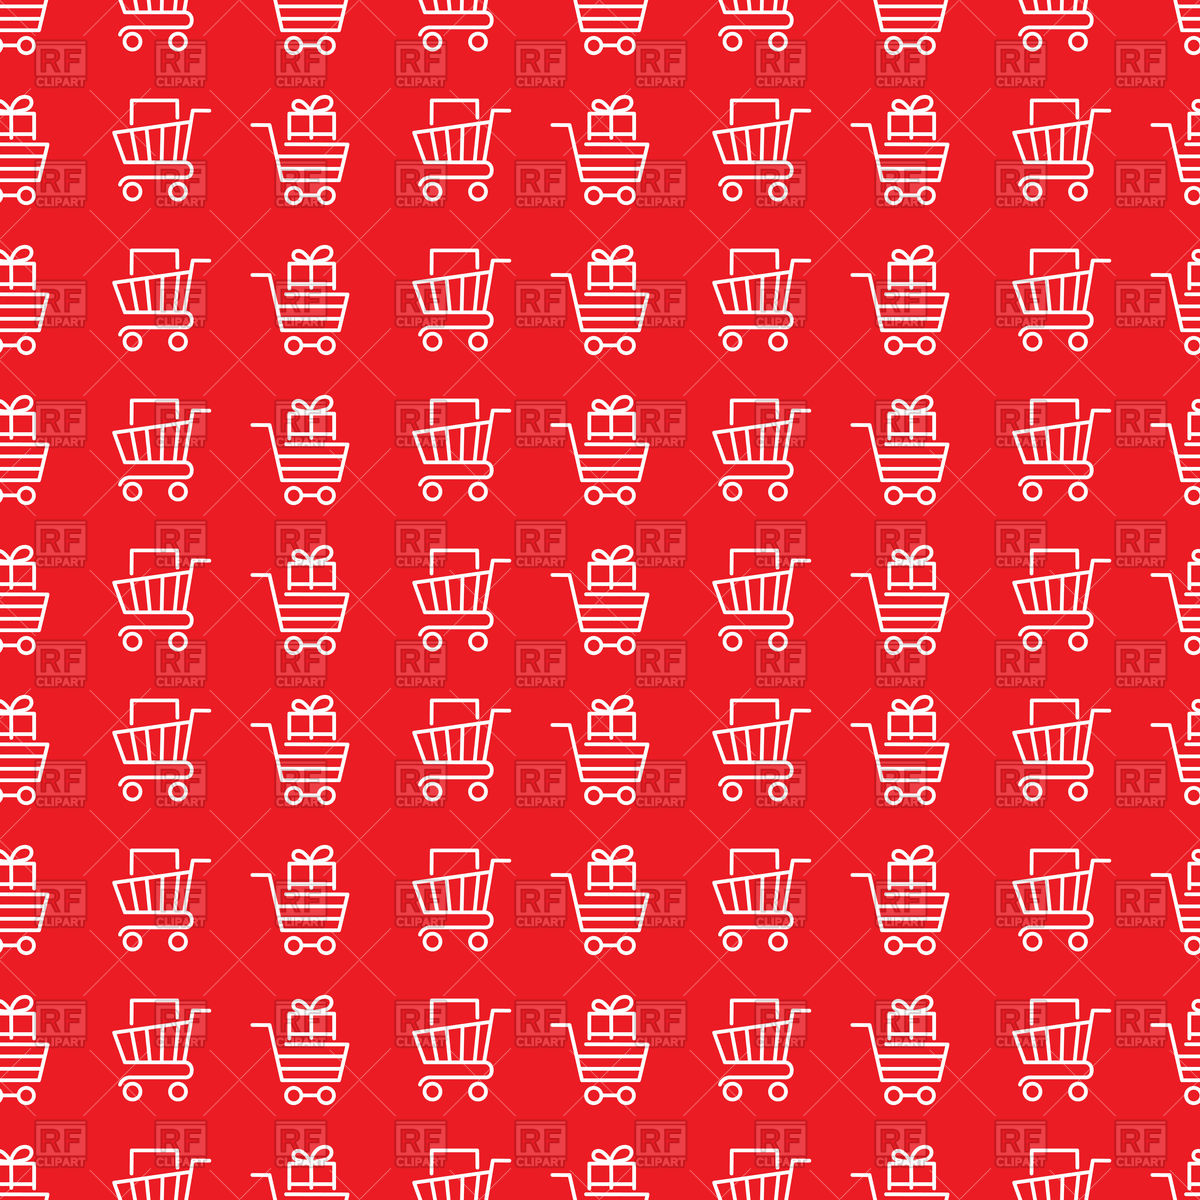 White Shopping Trolley On Red Background Vector Image Of